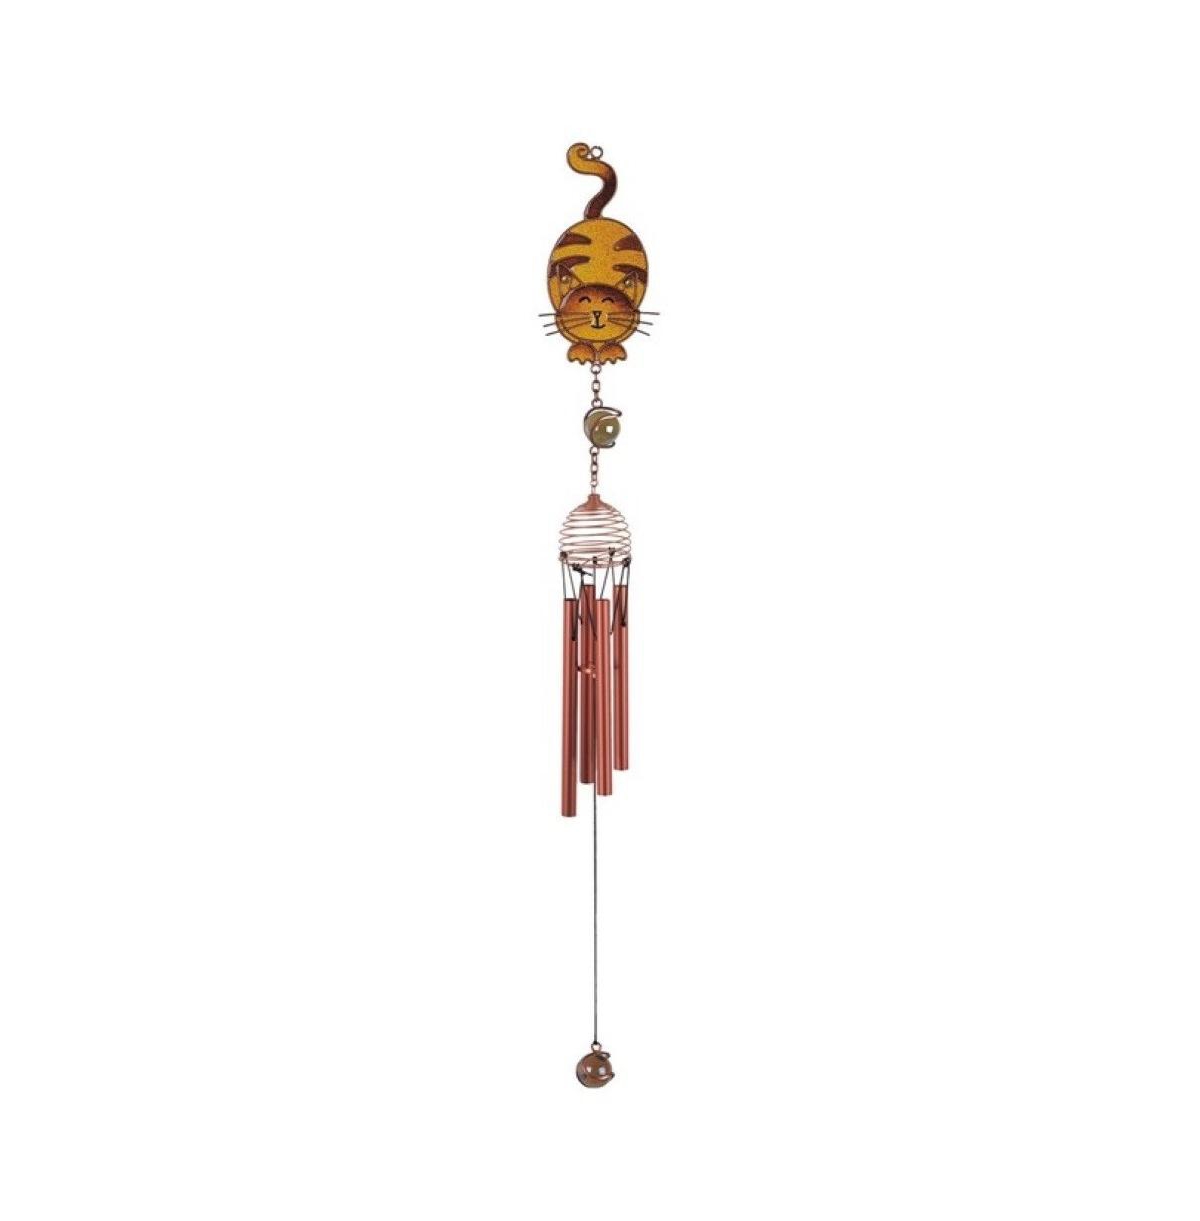 22" Long Brown Tabby Cat Copper and Gem Wind Chime Home Decor Perfect Gift for House Warming, Holidays and Birthdays - Multi